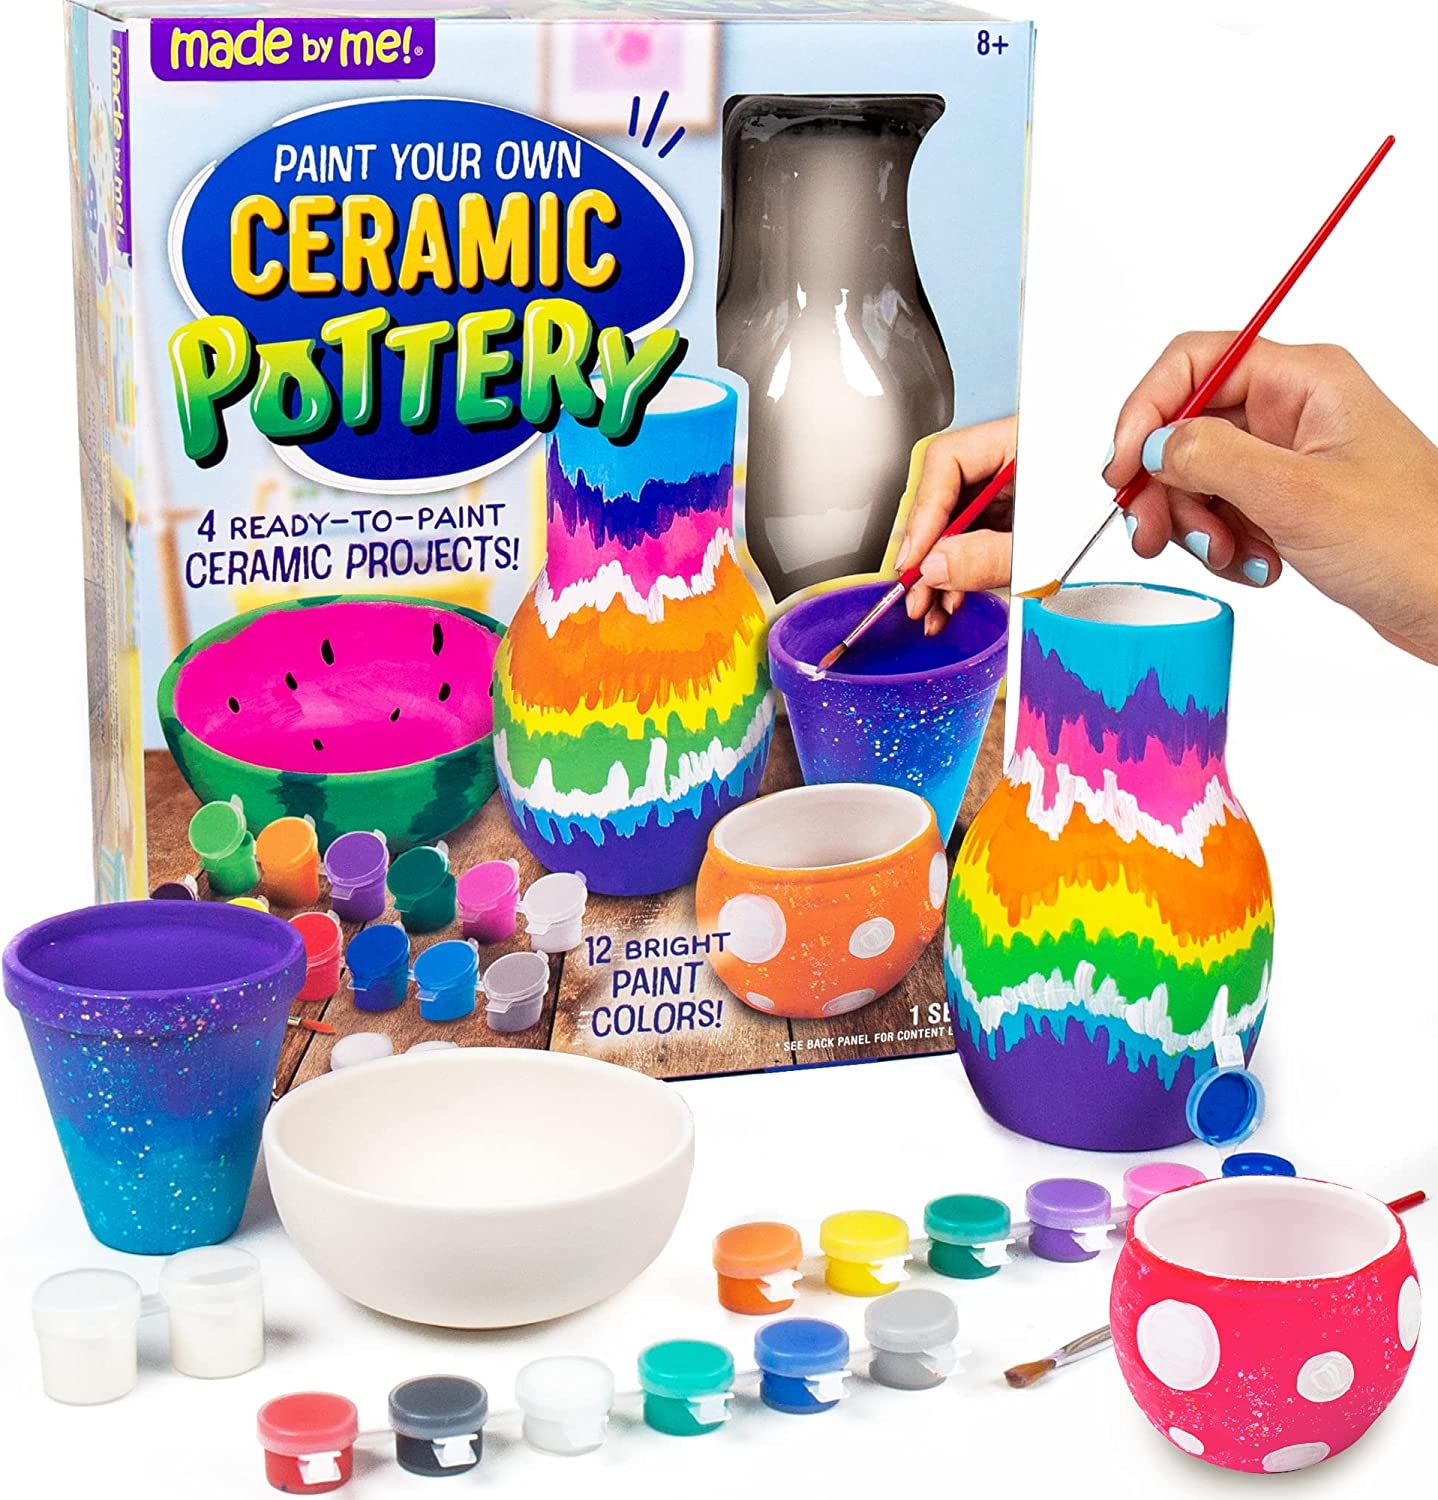 Made By Me Paint Your Own Ceramic Pottery, Fun Ceramic Painting Kit for Kids, Paint Your Own Ceramic Pottery Dish, Flower Pot,